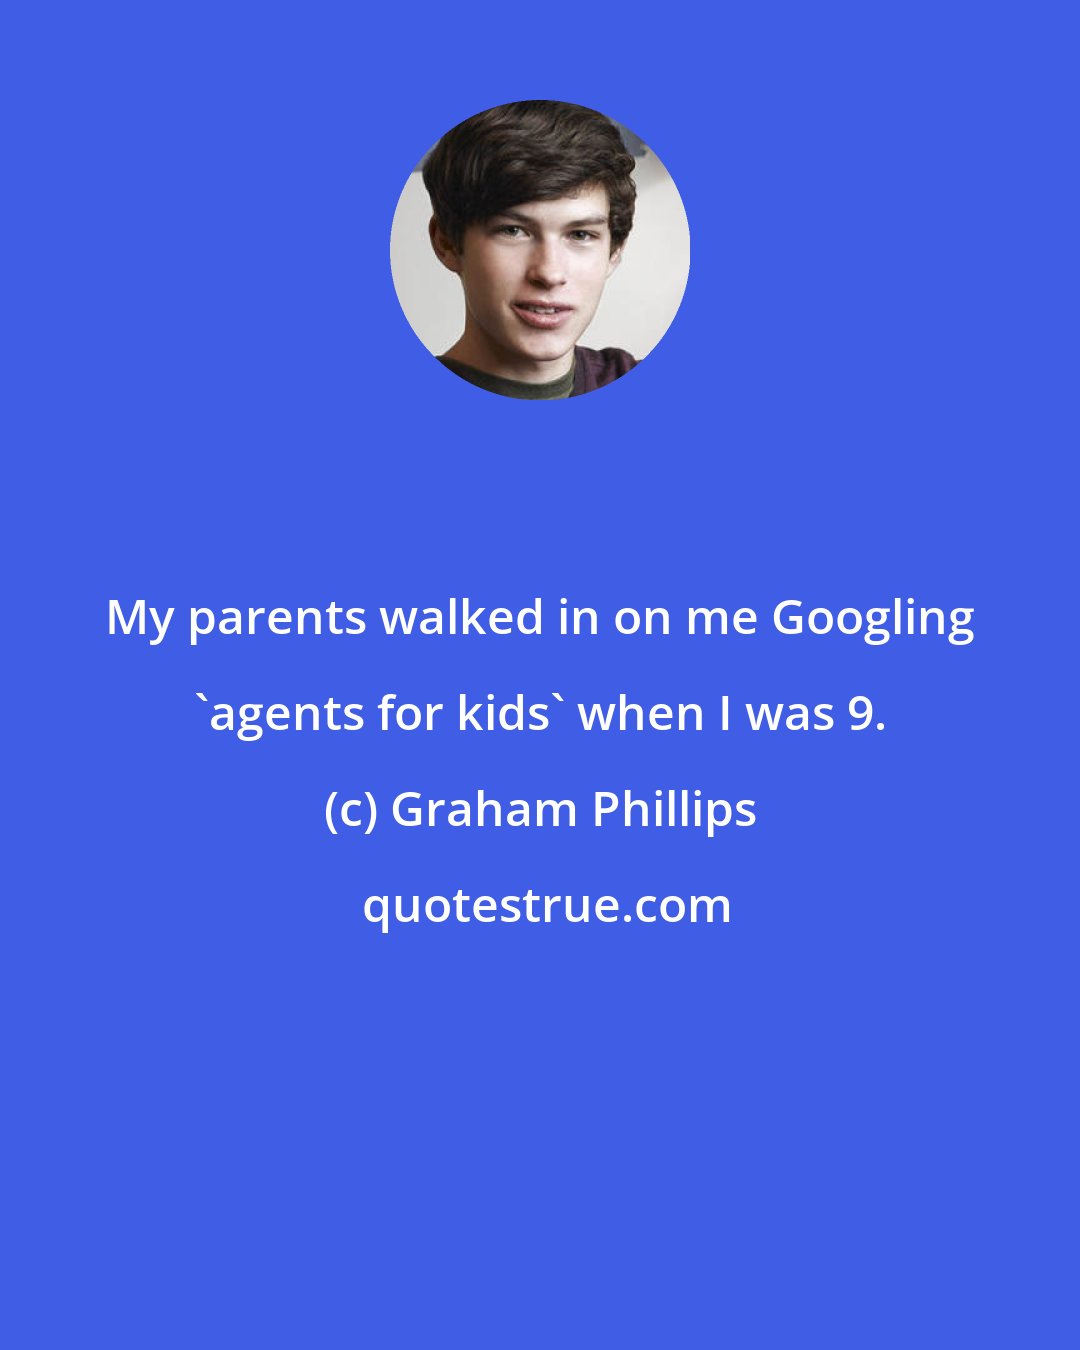 Graham Phillips: My parents walked in on me Googling 'agents for kids' when I was 9.